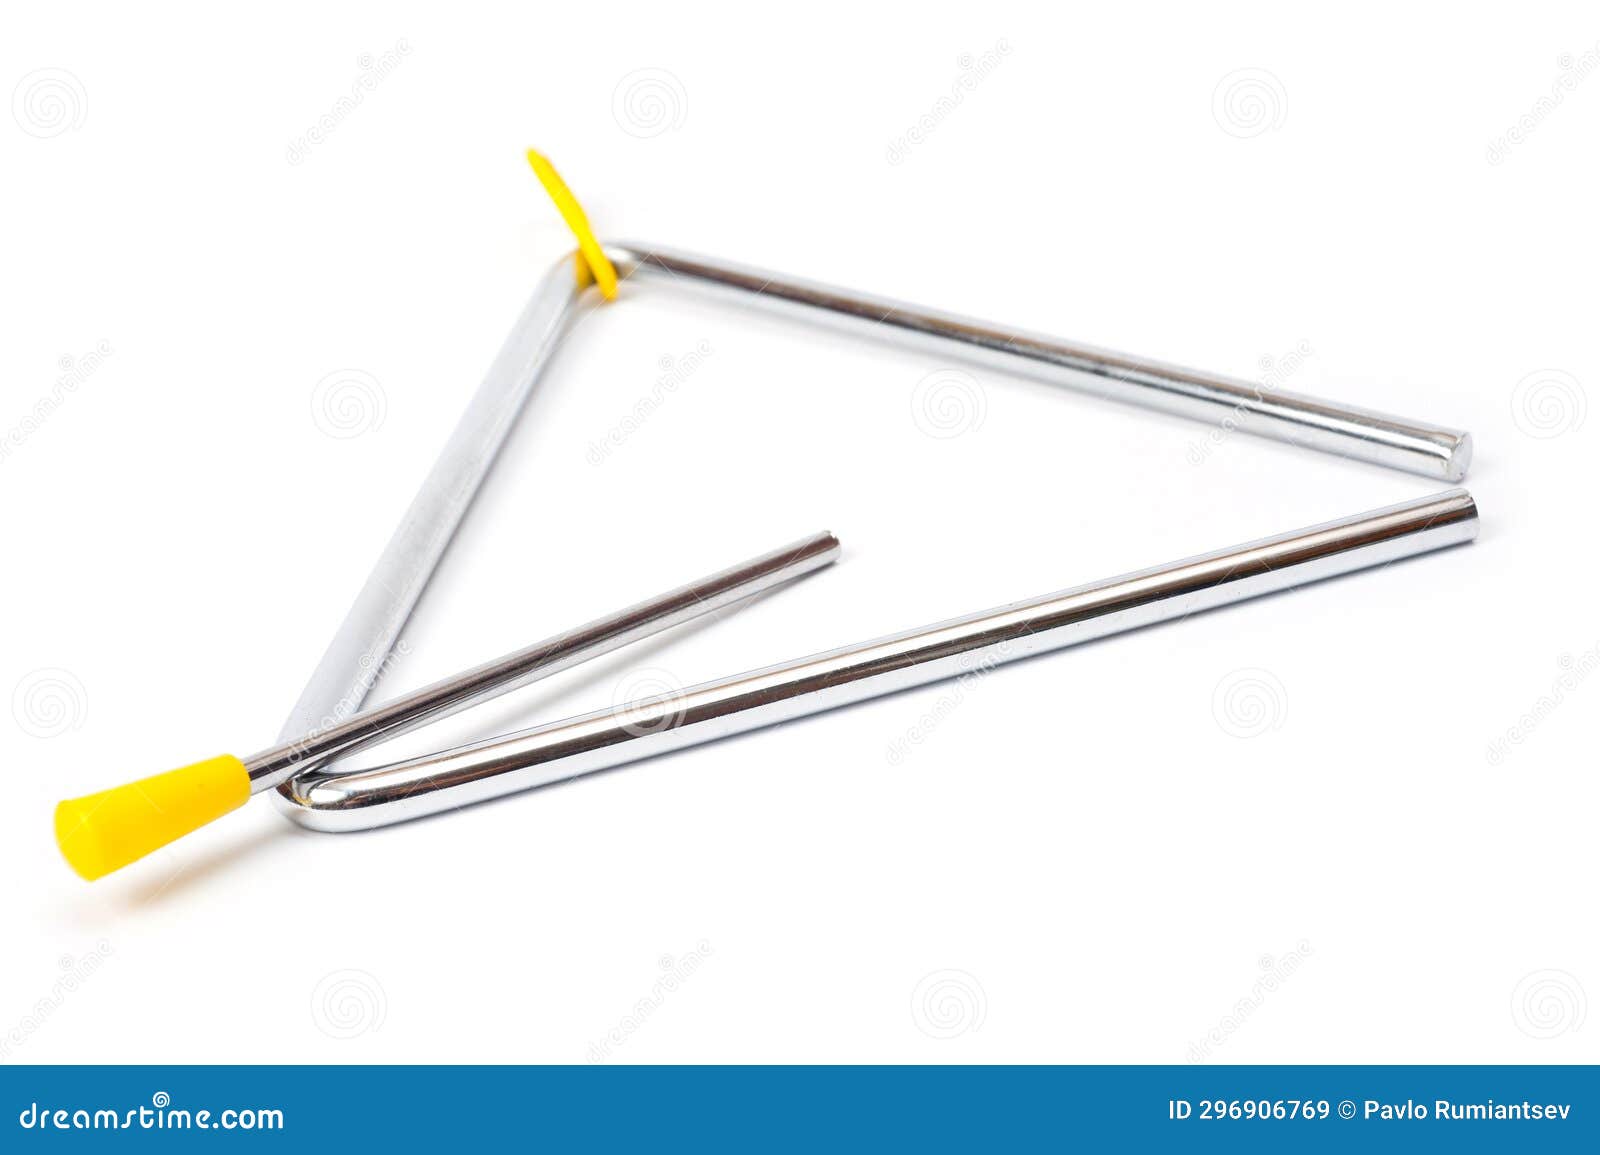 metal triangle, percussion musical instrument, easy to use for orchestras and ensembles